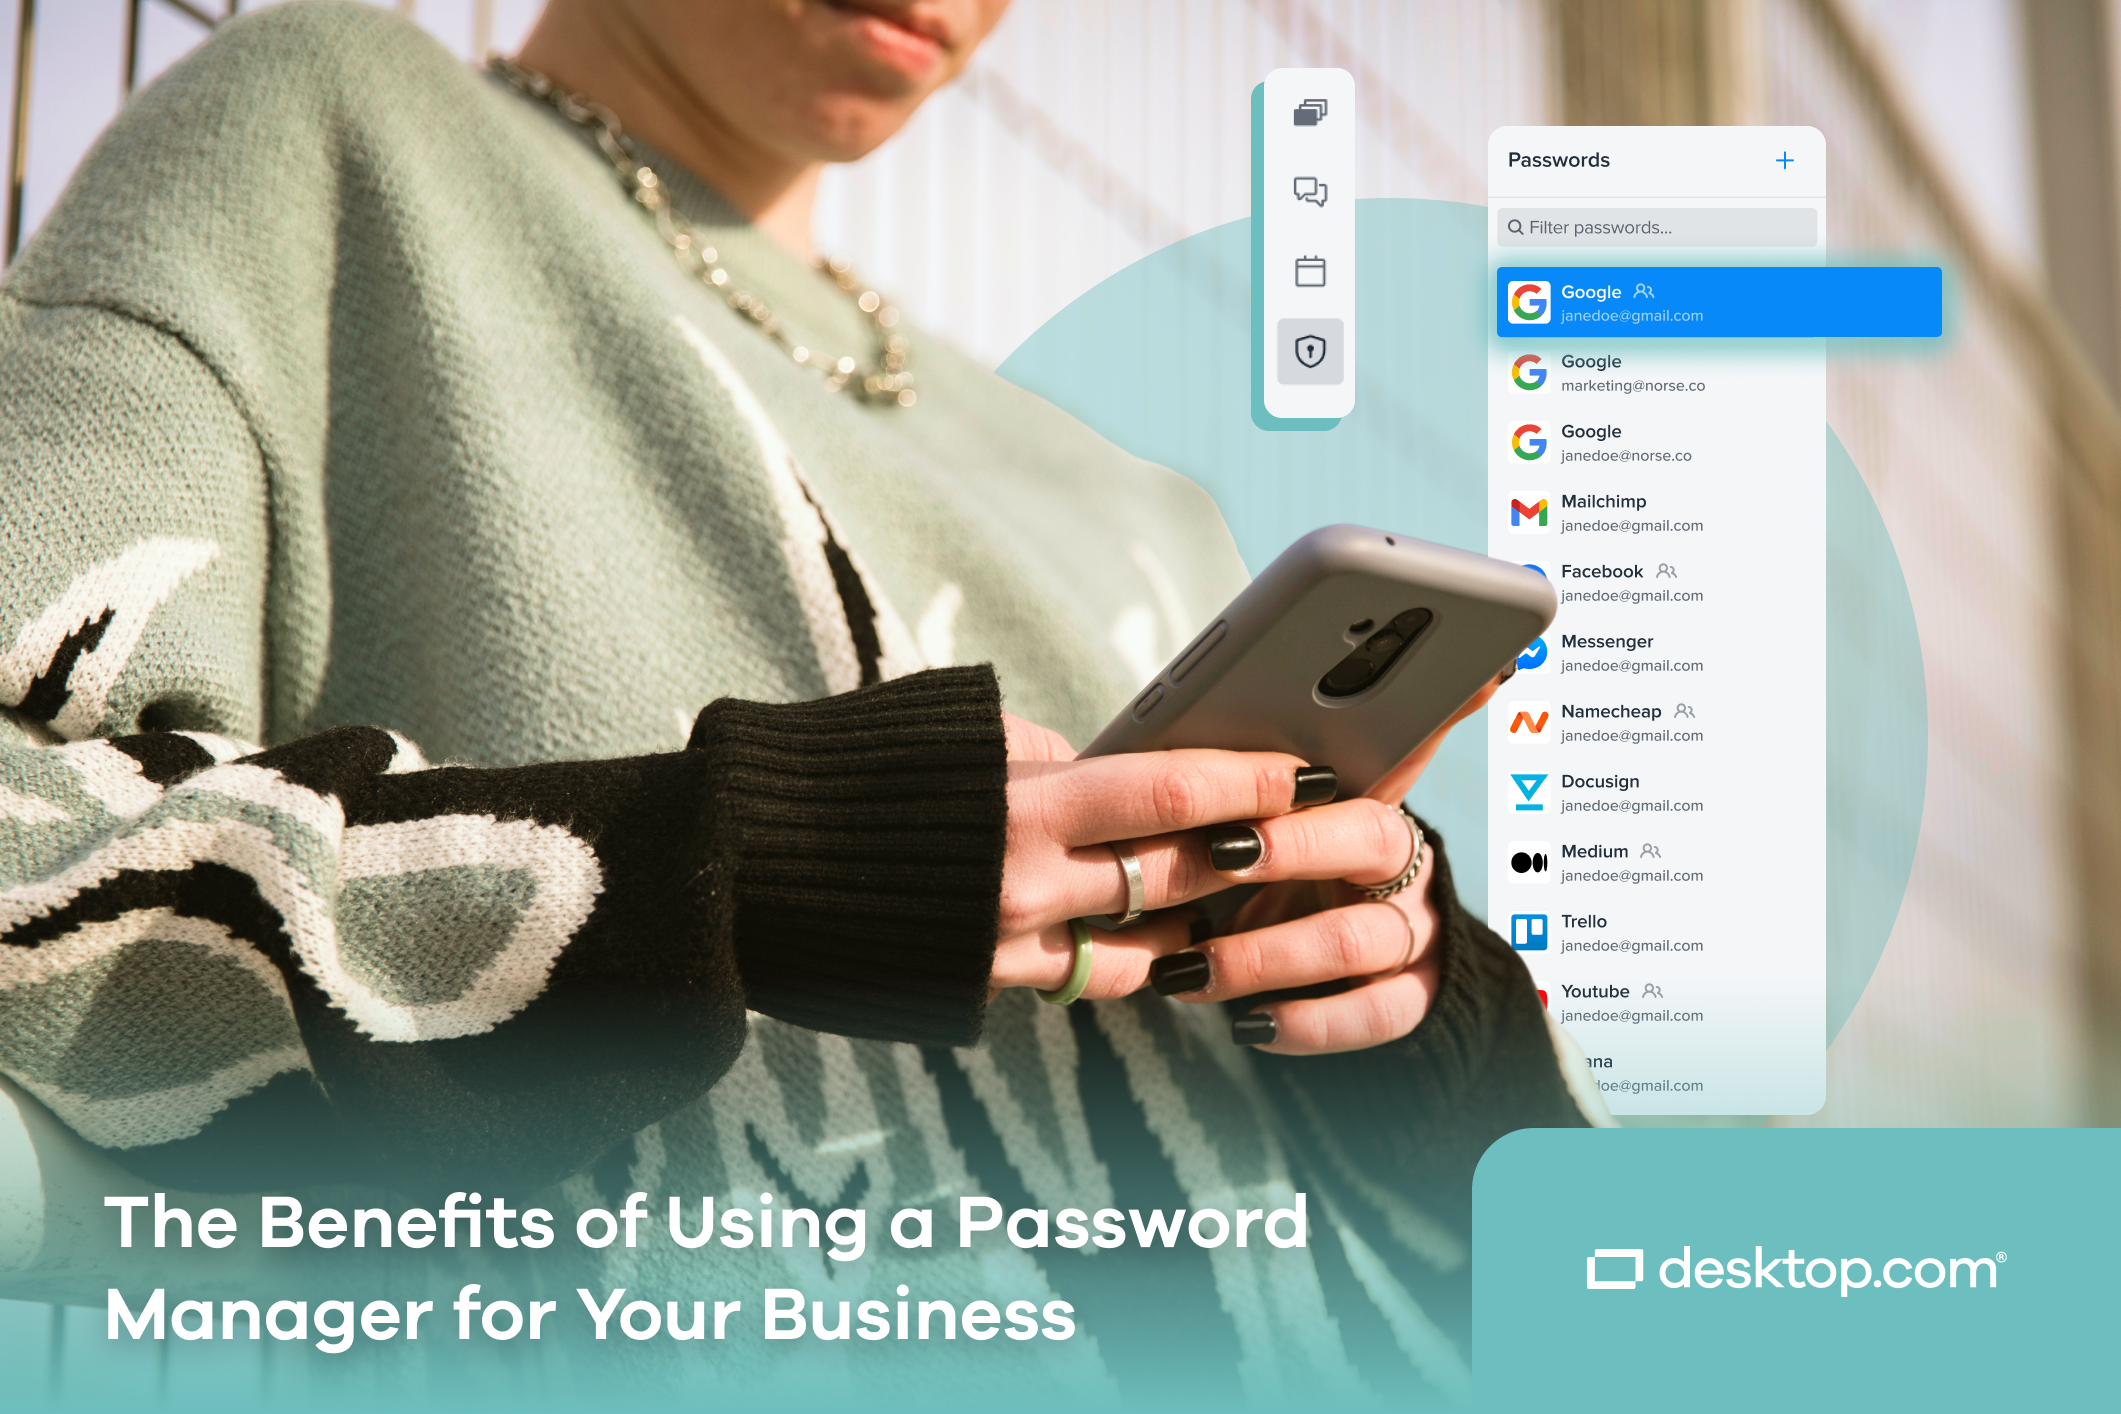 The Benefits of Using a Password Manager for Your Business